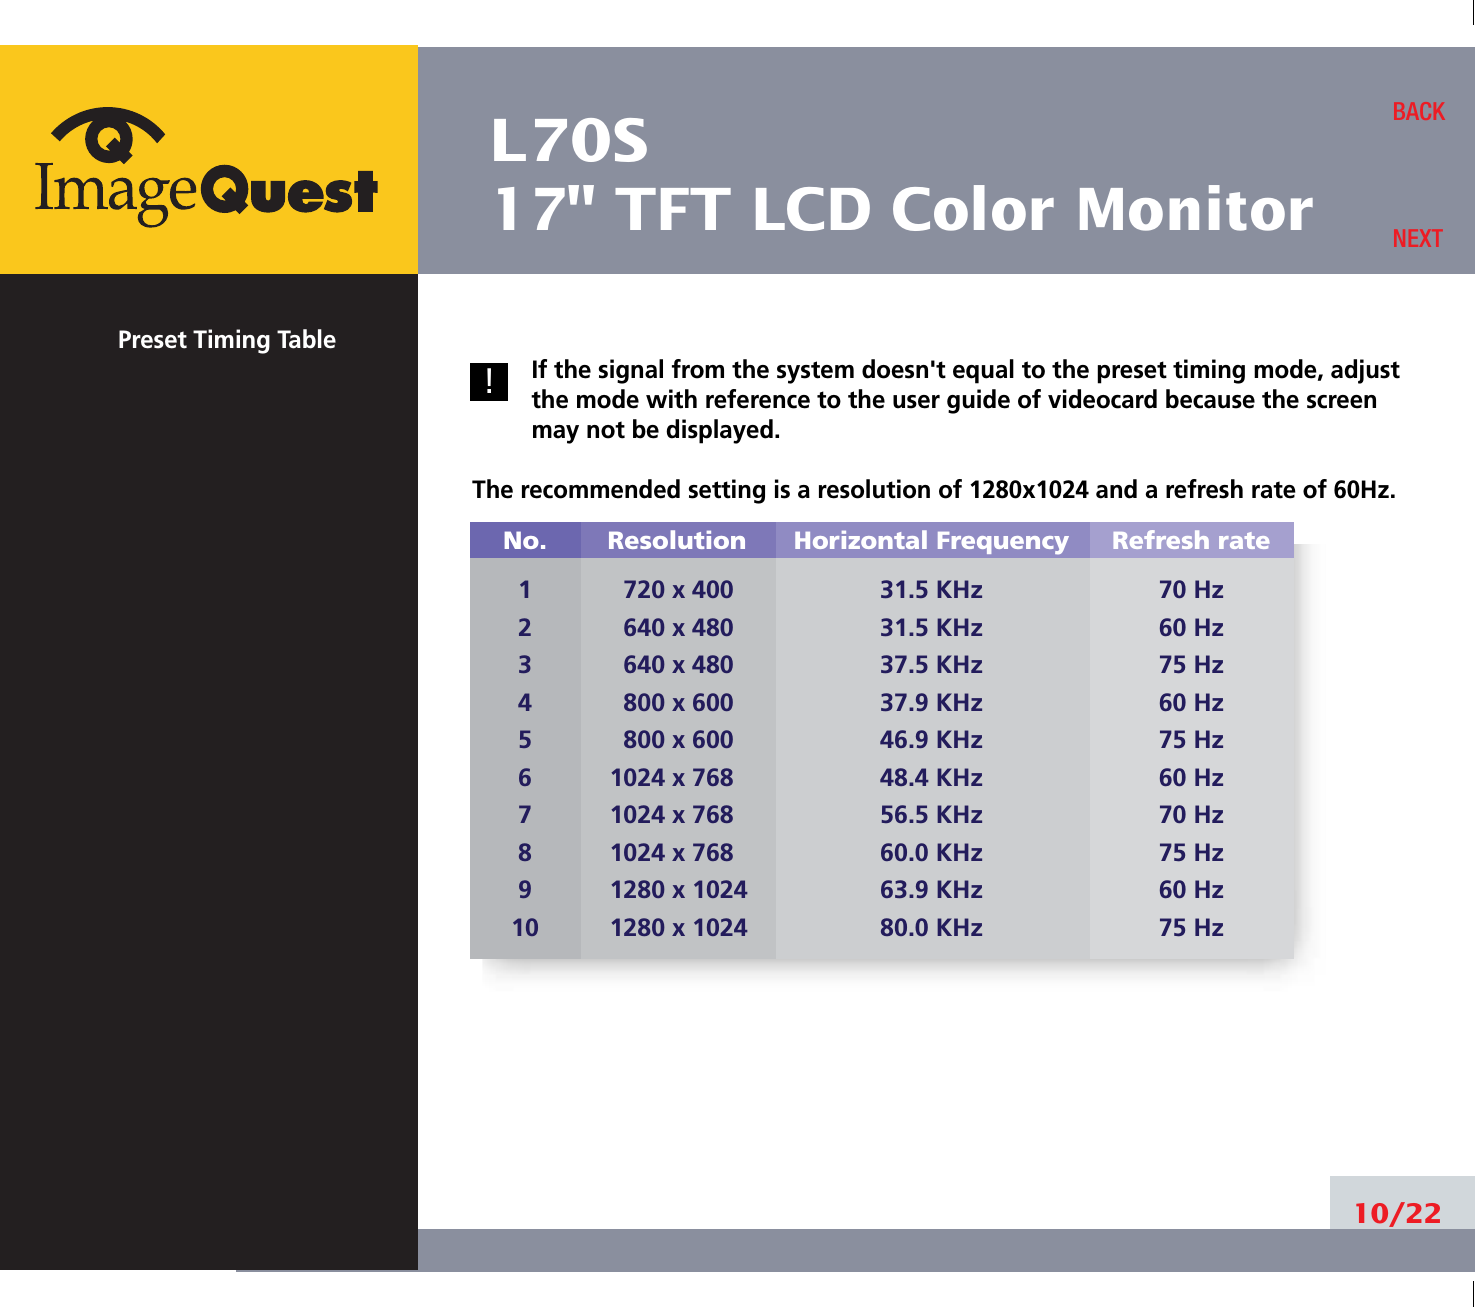 L70S17&quot; TFT LCD Color MonitorPreset Timing TableIf the signal from the system doesn&apos;t equal to the preset timing mode, adjustthe mode with reference to the user guide of videocard because the screenmay not be displayed.The recommended setting is a resolution of 1280x1024 and a refresh rate of 60Hz.10/22BACKNEXTNo.12345678910Resolution720 x 400640 x 480640 x 480 800 x 600800 x 6001024 x 7681024 x 7681024 x 7681280 x 10241280 x 1024Horizontal Frequency31.5 KHz31.5 KHz37.5 KHz37.9 KHz46.9 KHz48.4 KHz56.5 KHz60.0 KHz63.9 KHz80.0 KHzRefresh rate70 Hz60 Hz75 Hz60 Hz75 Hz60 Hz70 Hz75 Hz60 Hz75 Hz!